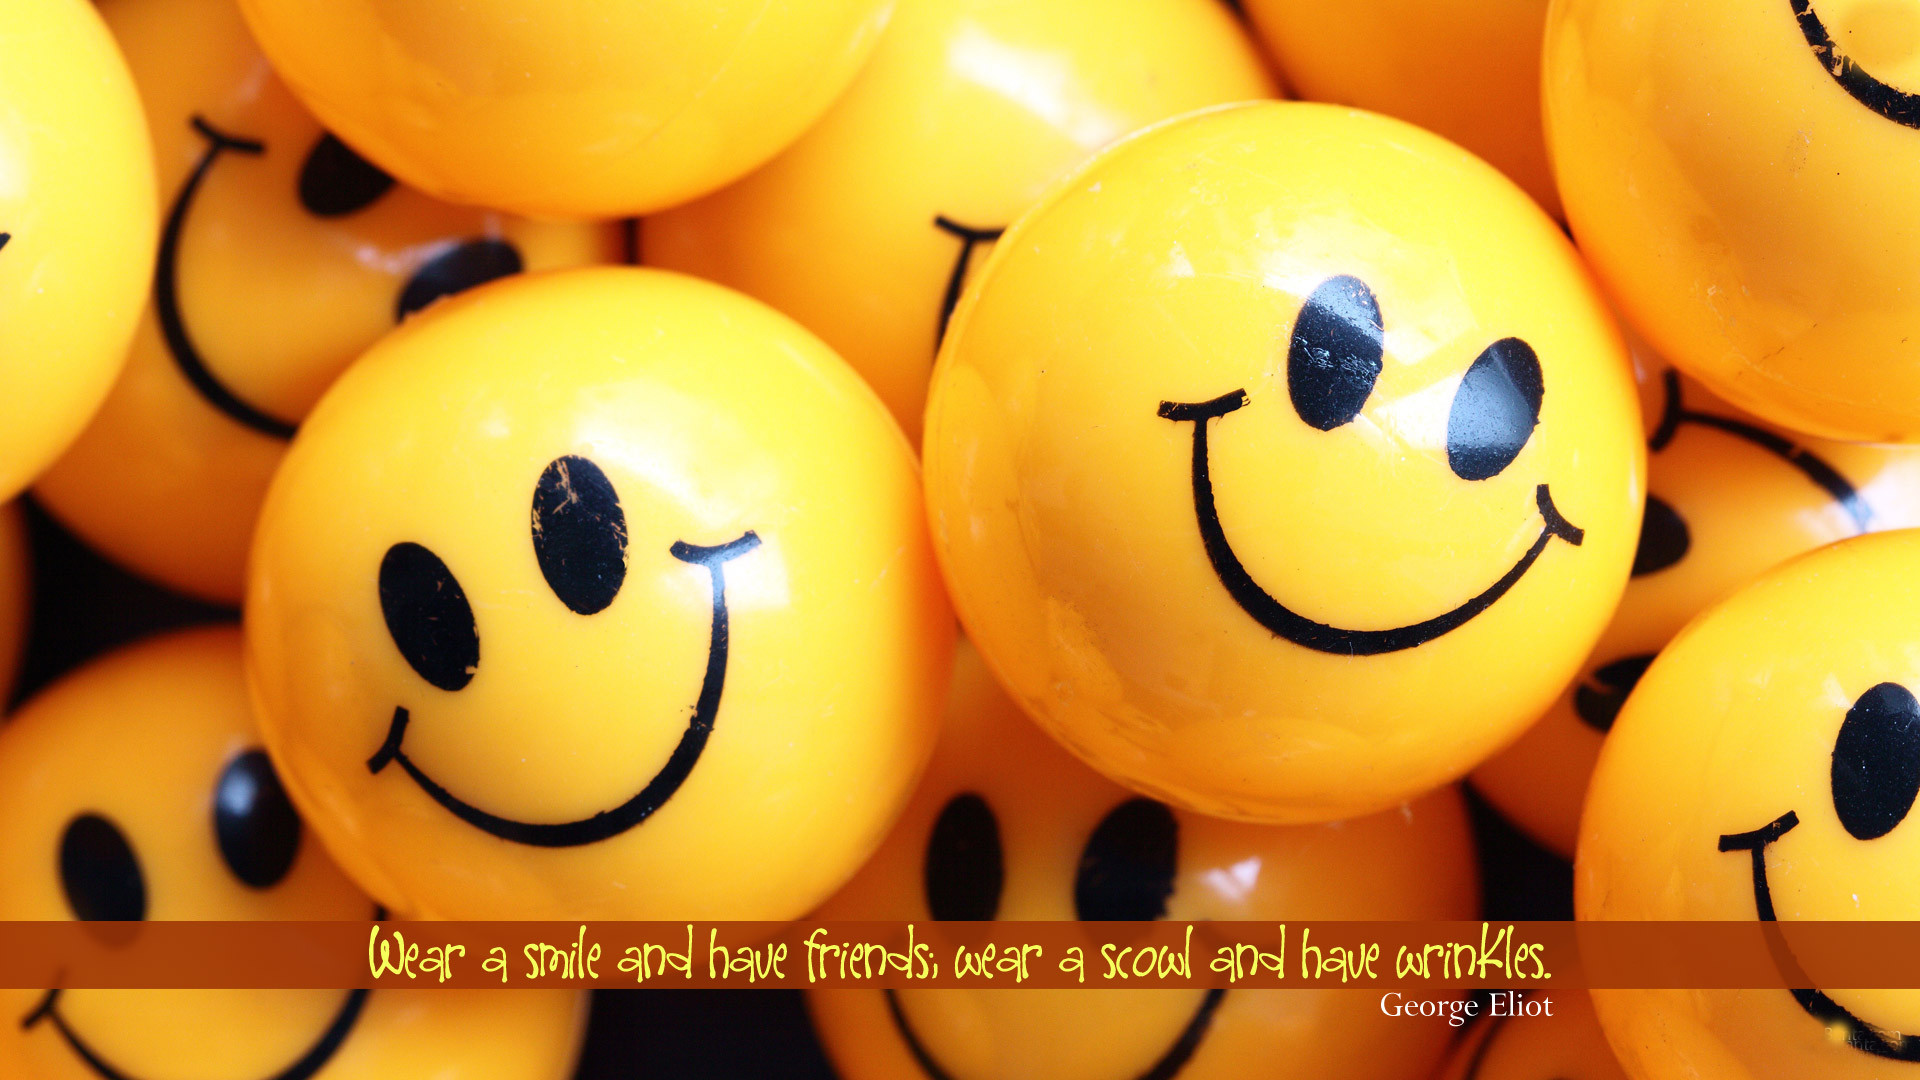 Best Friend Quotes Images Free Download - New Friendship Photos Download -  1920x1080 Wallpaper 